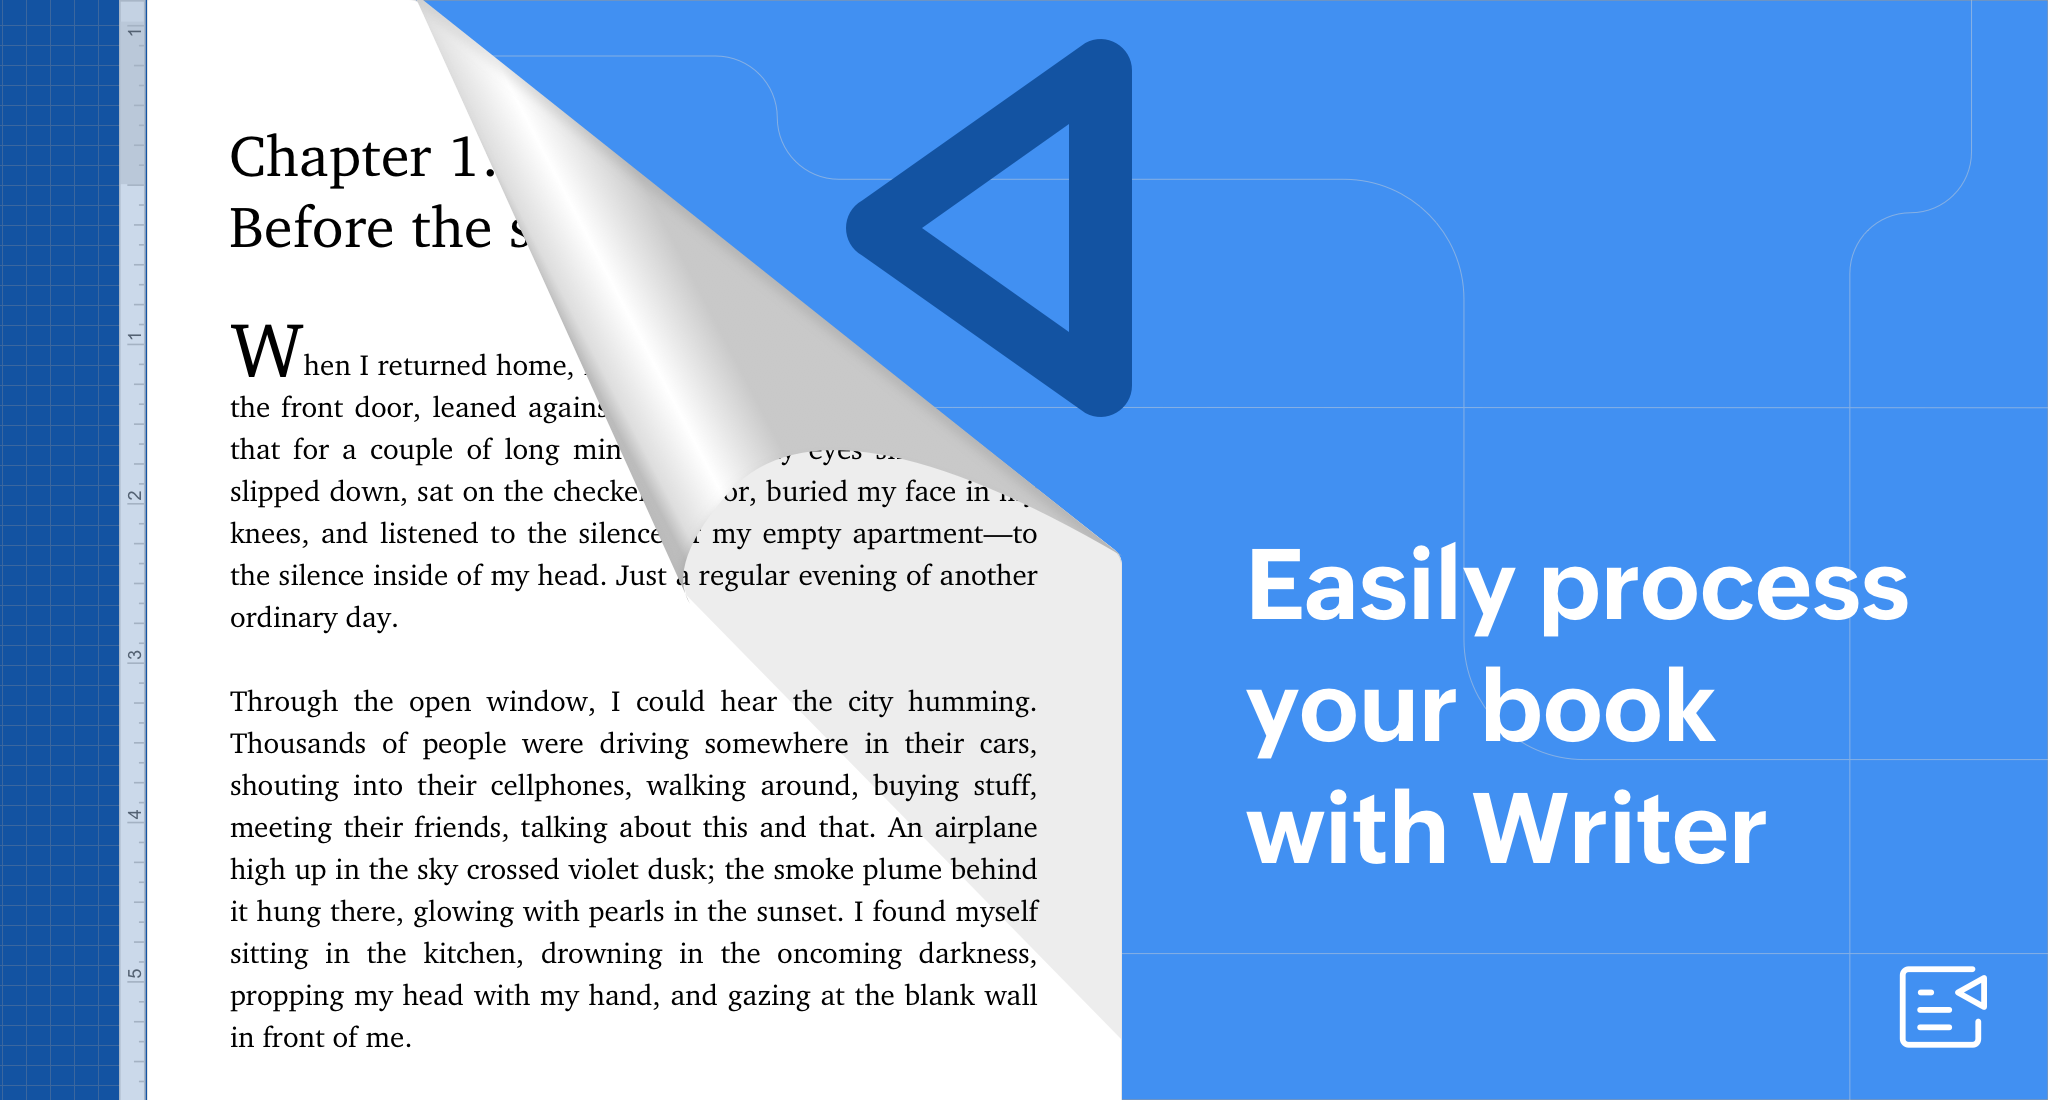 Almost finished writing your book this NaNoWriMo? Now, you can easily process it with Writer!